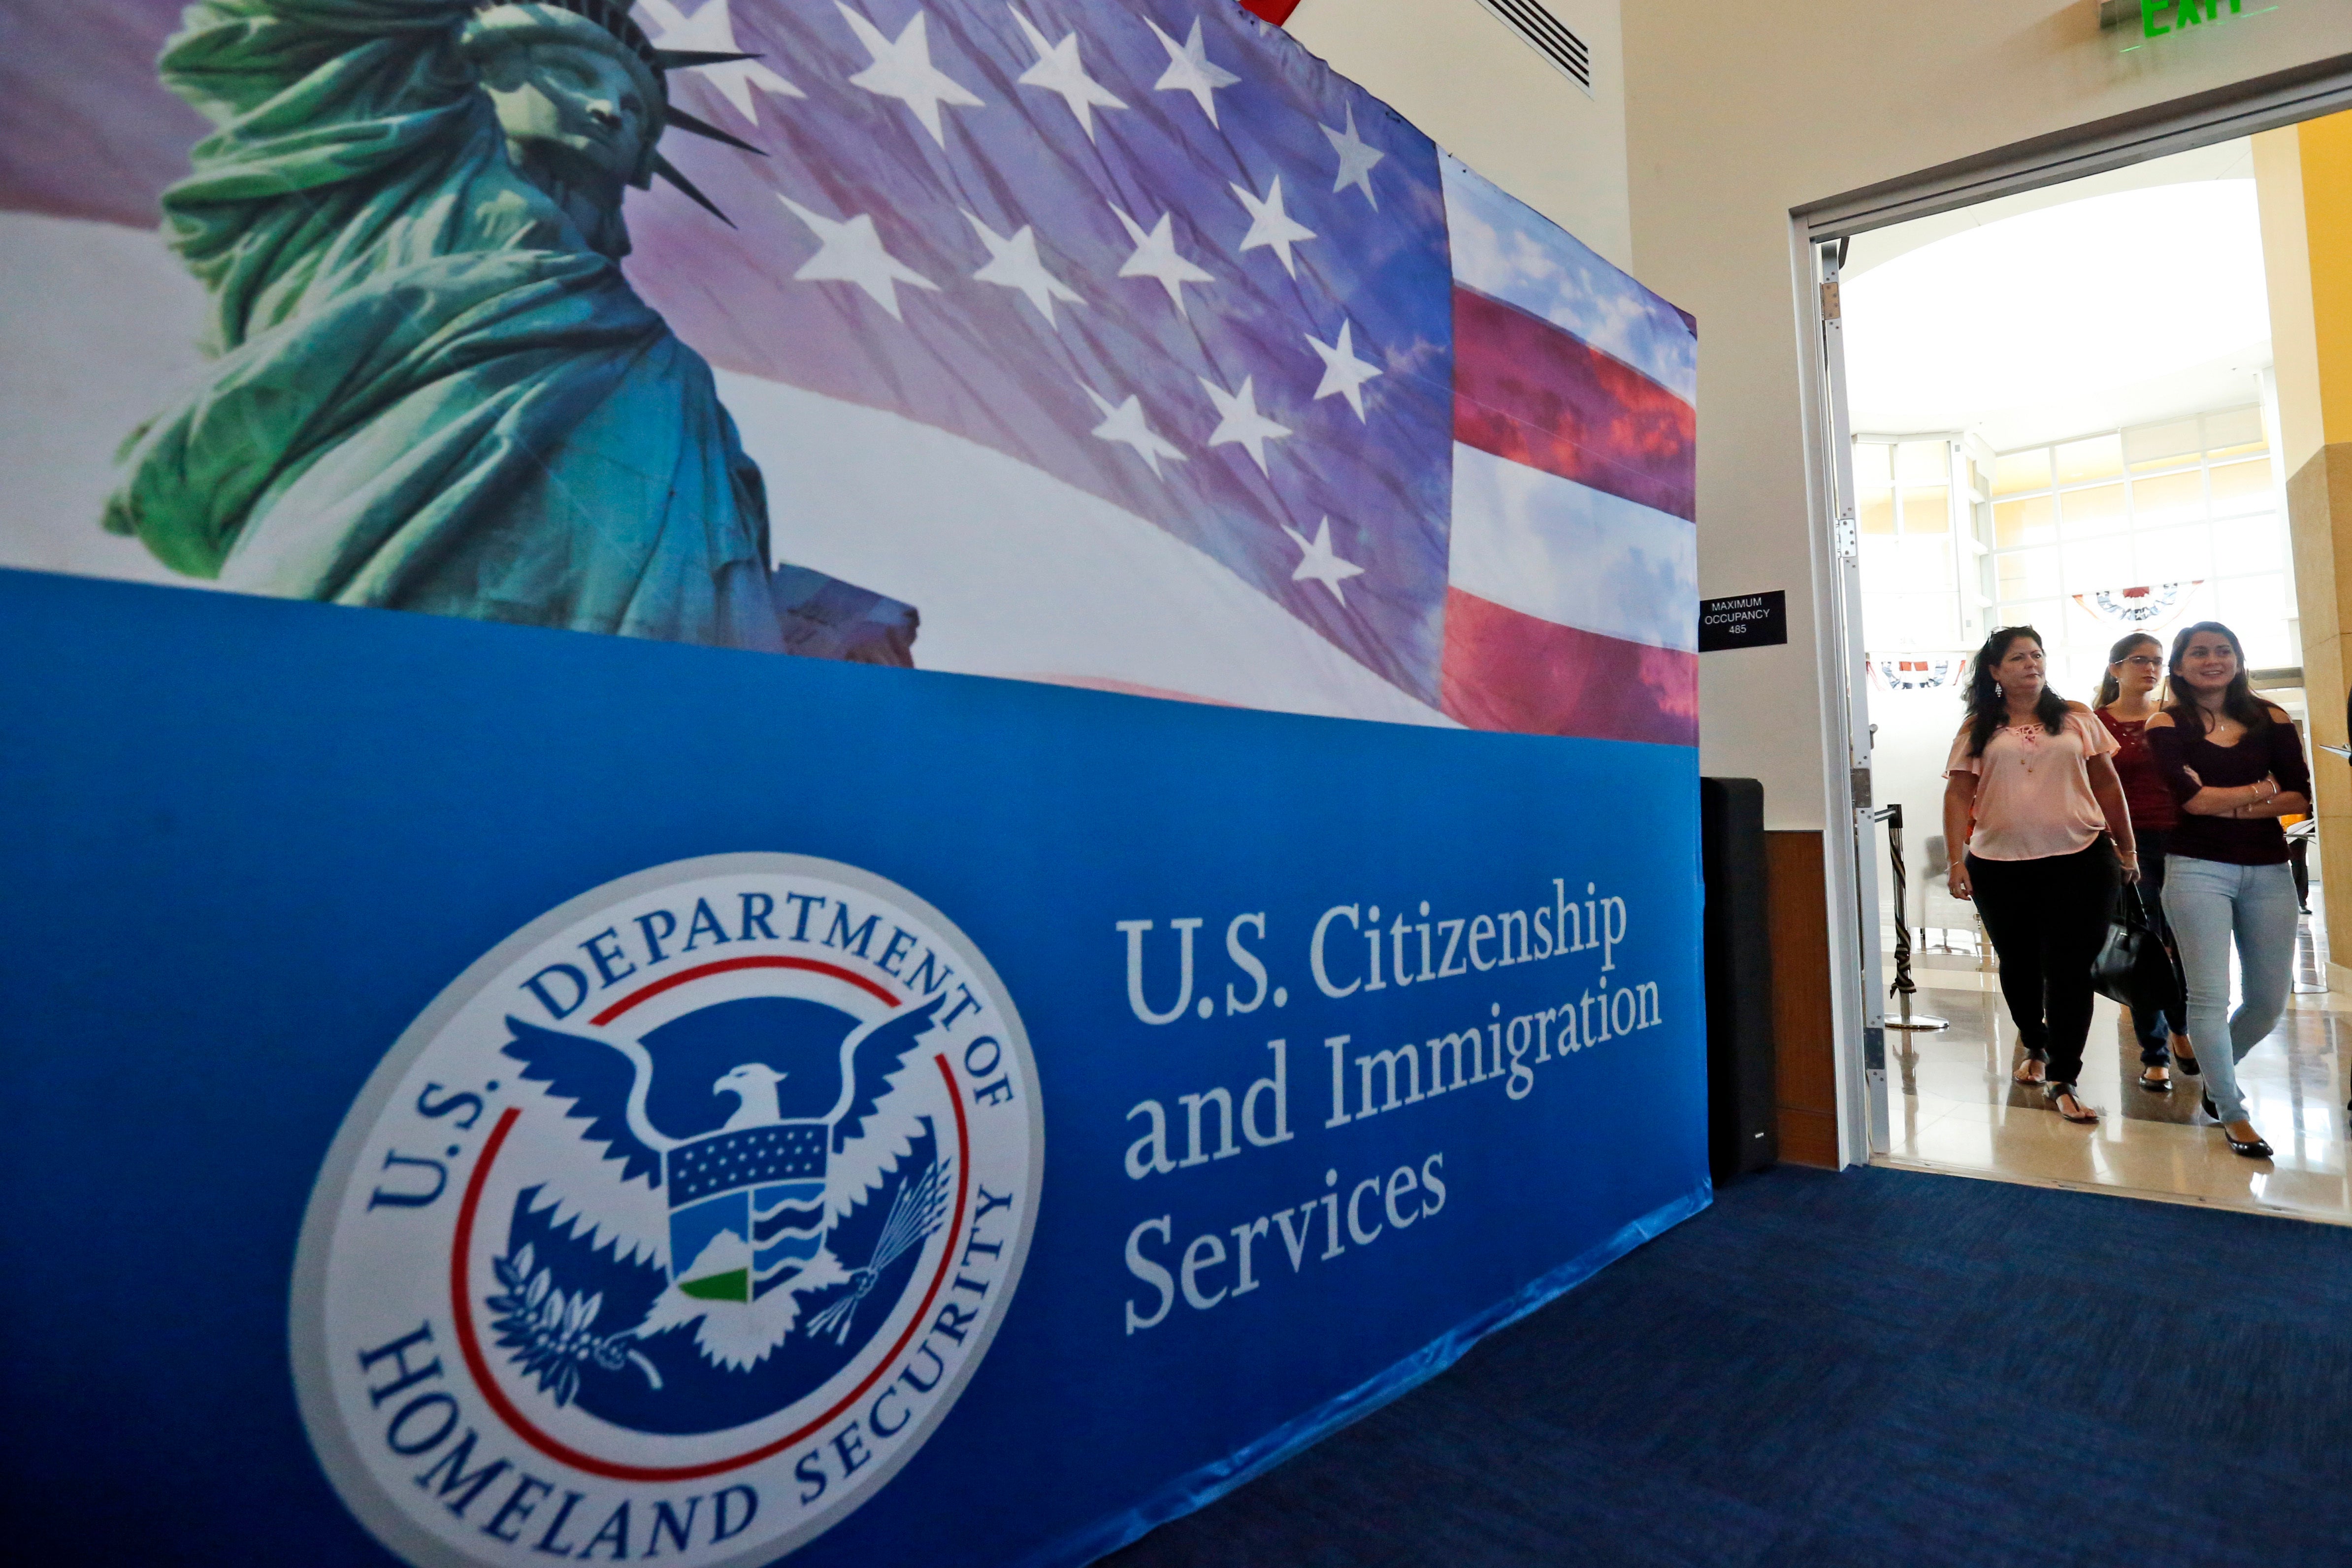 US agency raises ‘serious concerns’ about tech visa lottery